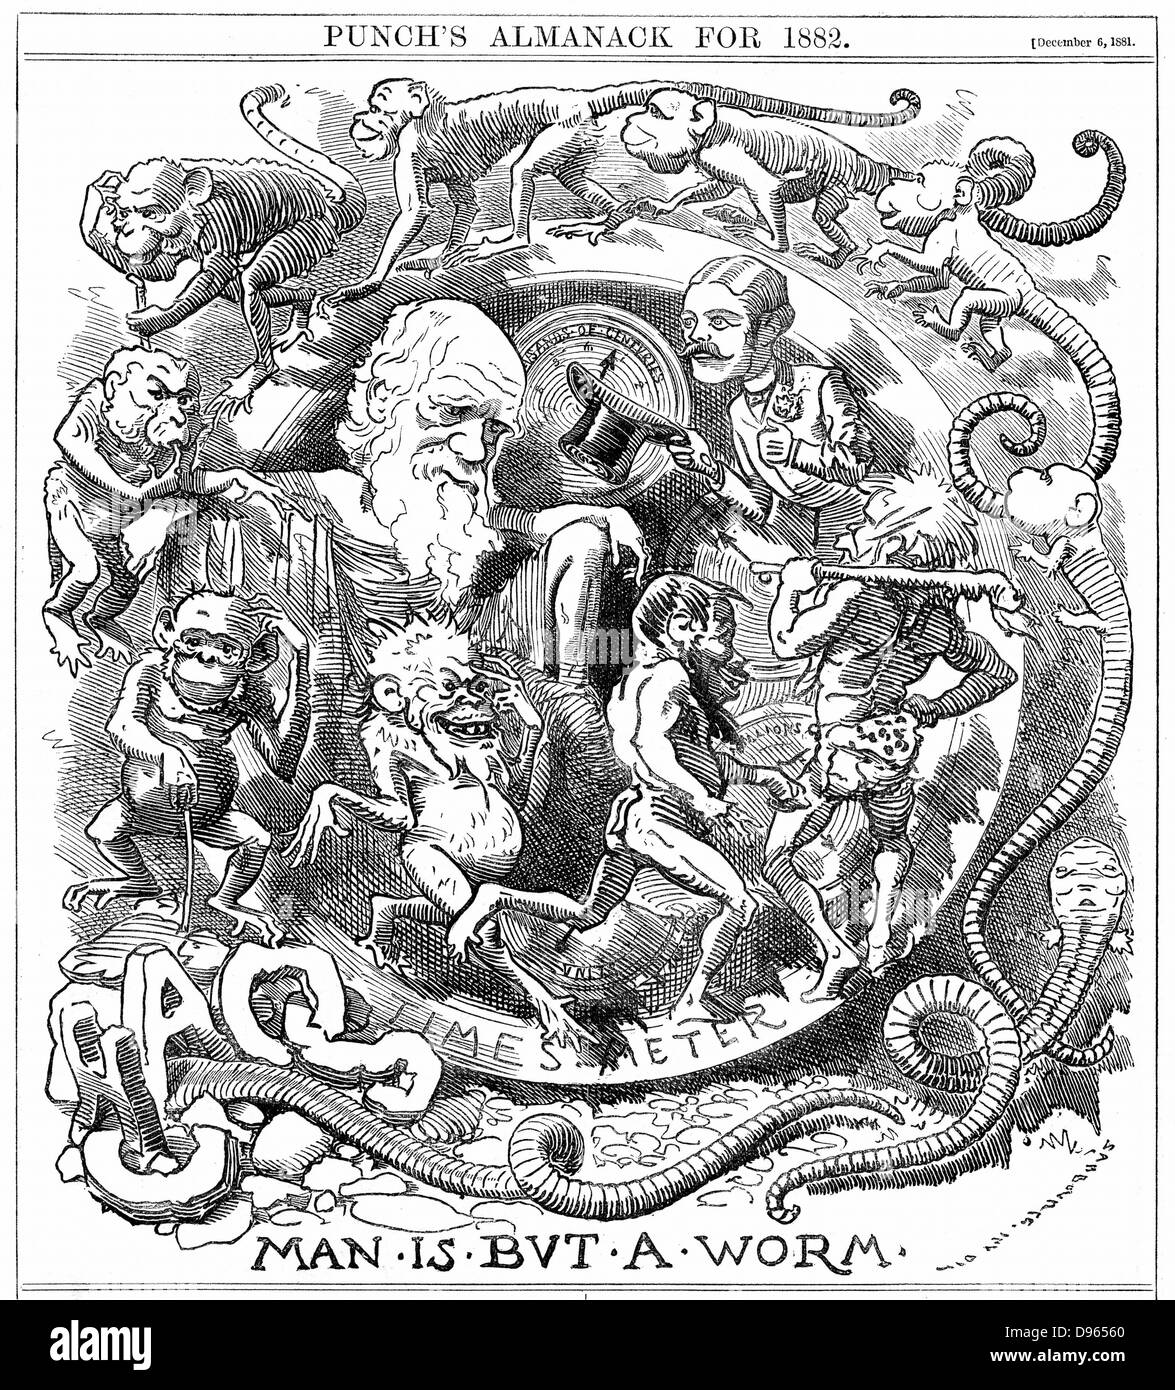 Man is but a worm. Cartoon from 'Punch', London, 6 December 1881, the year in which Darwin published 'The Formation of Vegetable Mould through the action of Worms', showing evolution from worm to man, watched by Charles Darwin (1802-1882). Wood engraving. Stock Photo